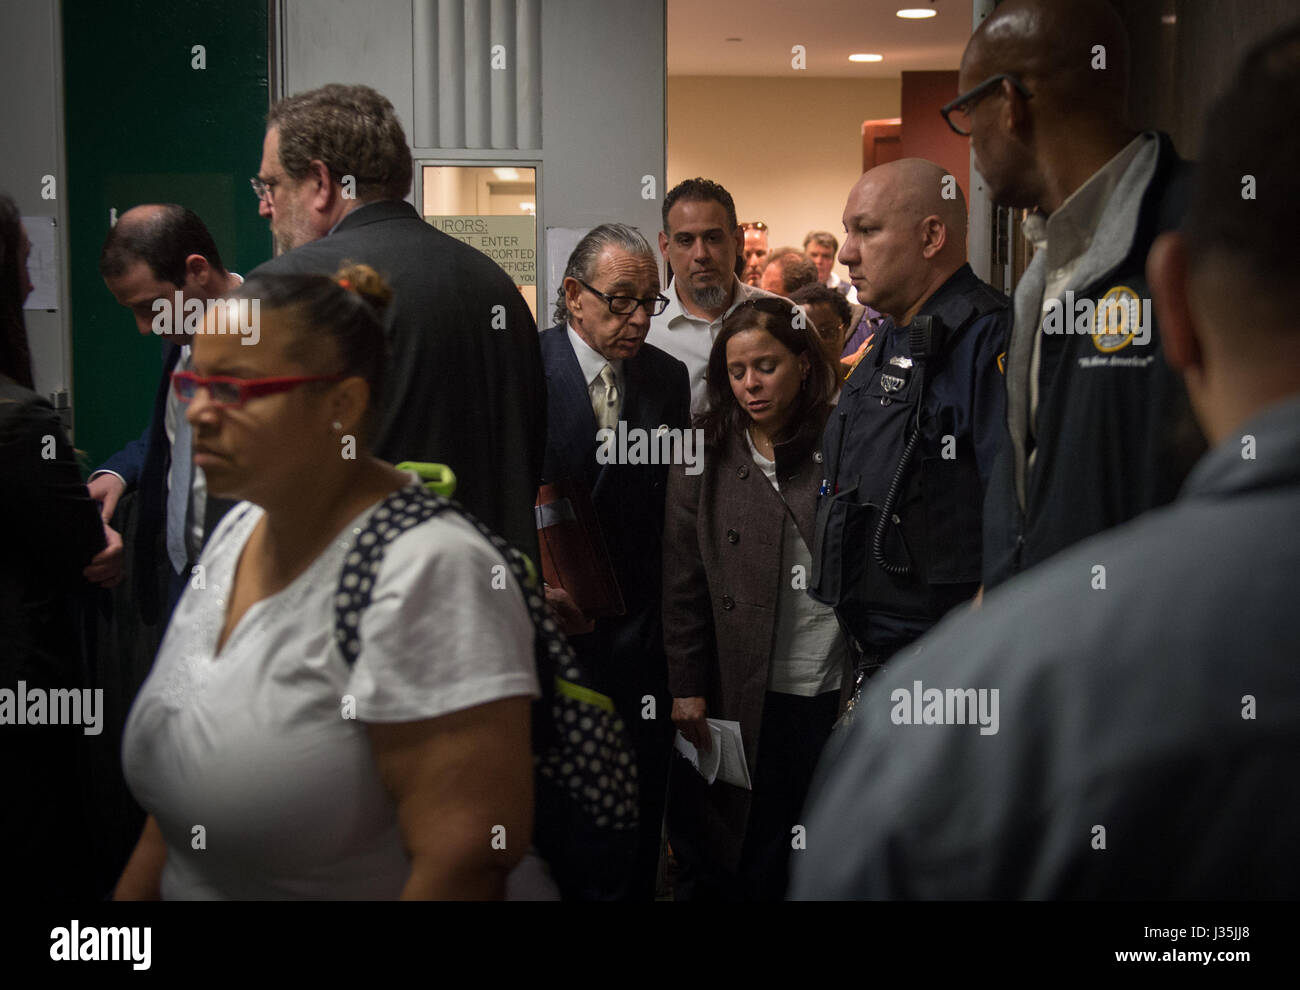 New York, NY, USA. 2nd May, 2017. Attorney SANFORD RUBENSTEIN escorts Nancy Rodriguez from the courthouse after Domonic Whilby is sentenced at Manhattan Supreme Court after being convicted of aggravated vehicular homicide in the death of her husband, Bus Operator William Pena, May 2, 2017 in New York. Credit: Bryan Smith/ZUMA Wire/Alamy Live News Stock Photo